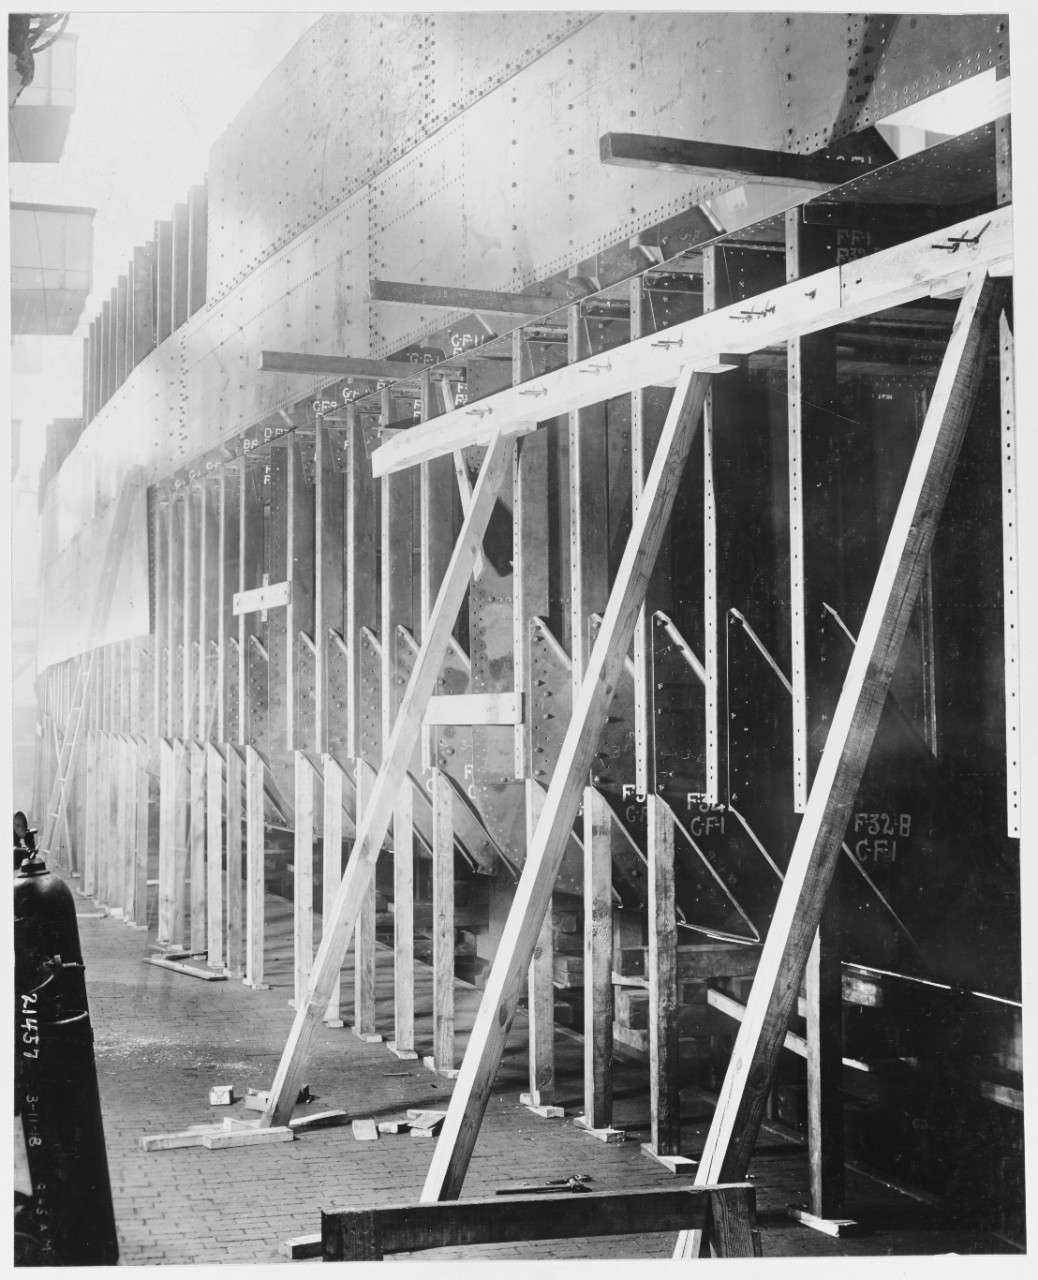 Construction of Ford Eagle Boats, Ford Motor Company, March 11, 1918